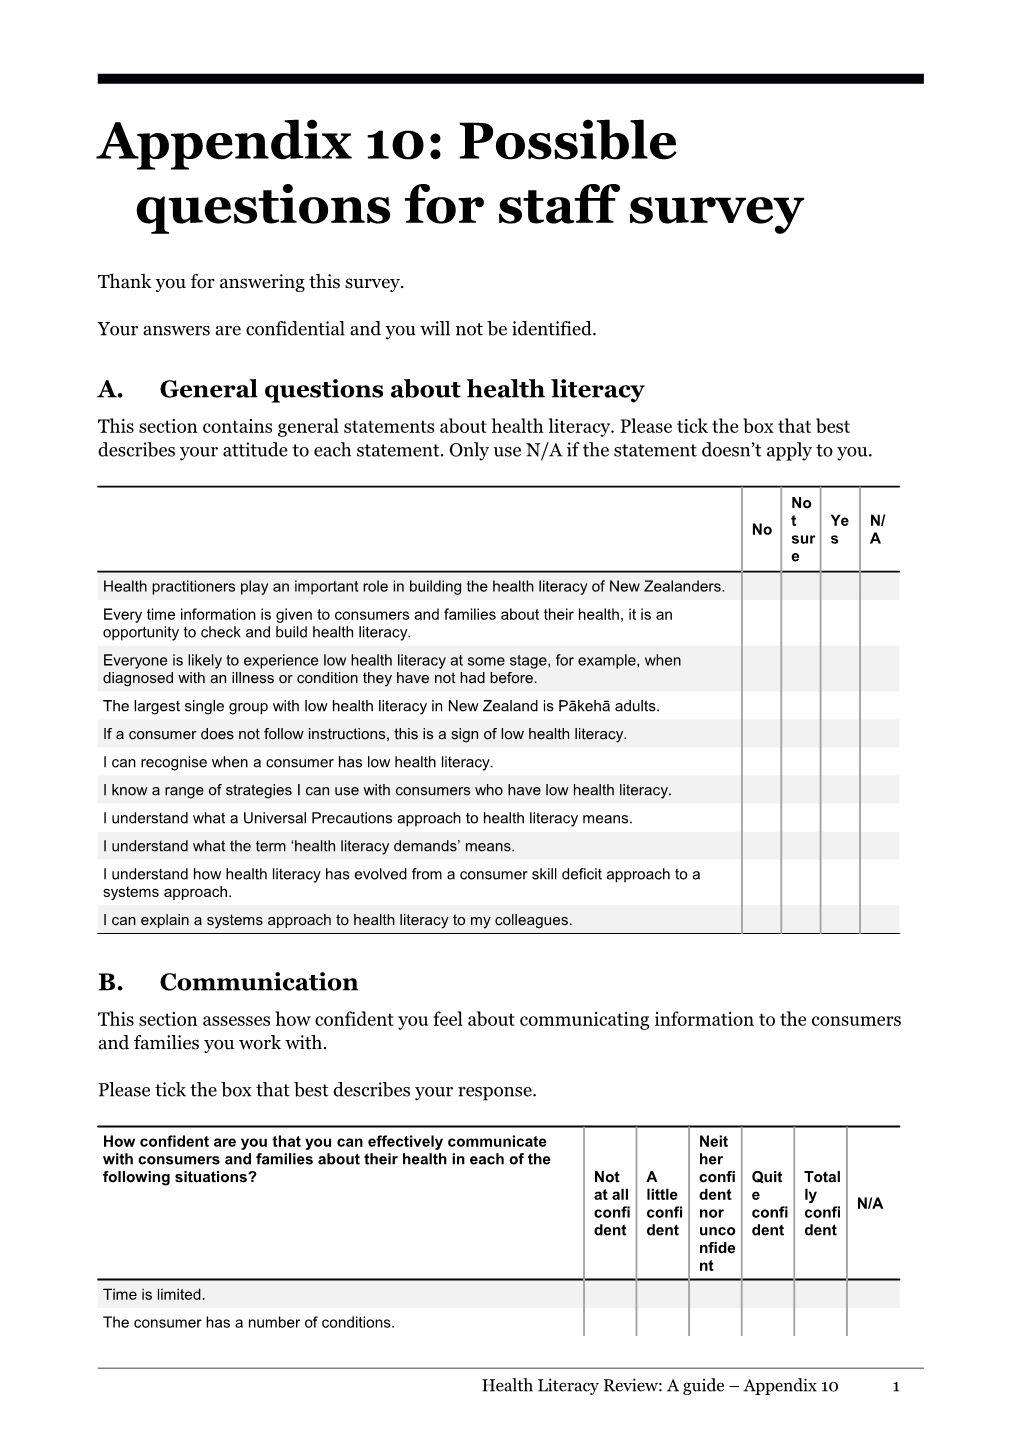 Health Literacy Review: a Guide: Appendix 10: Possible Questions for Staff Survey